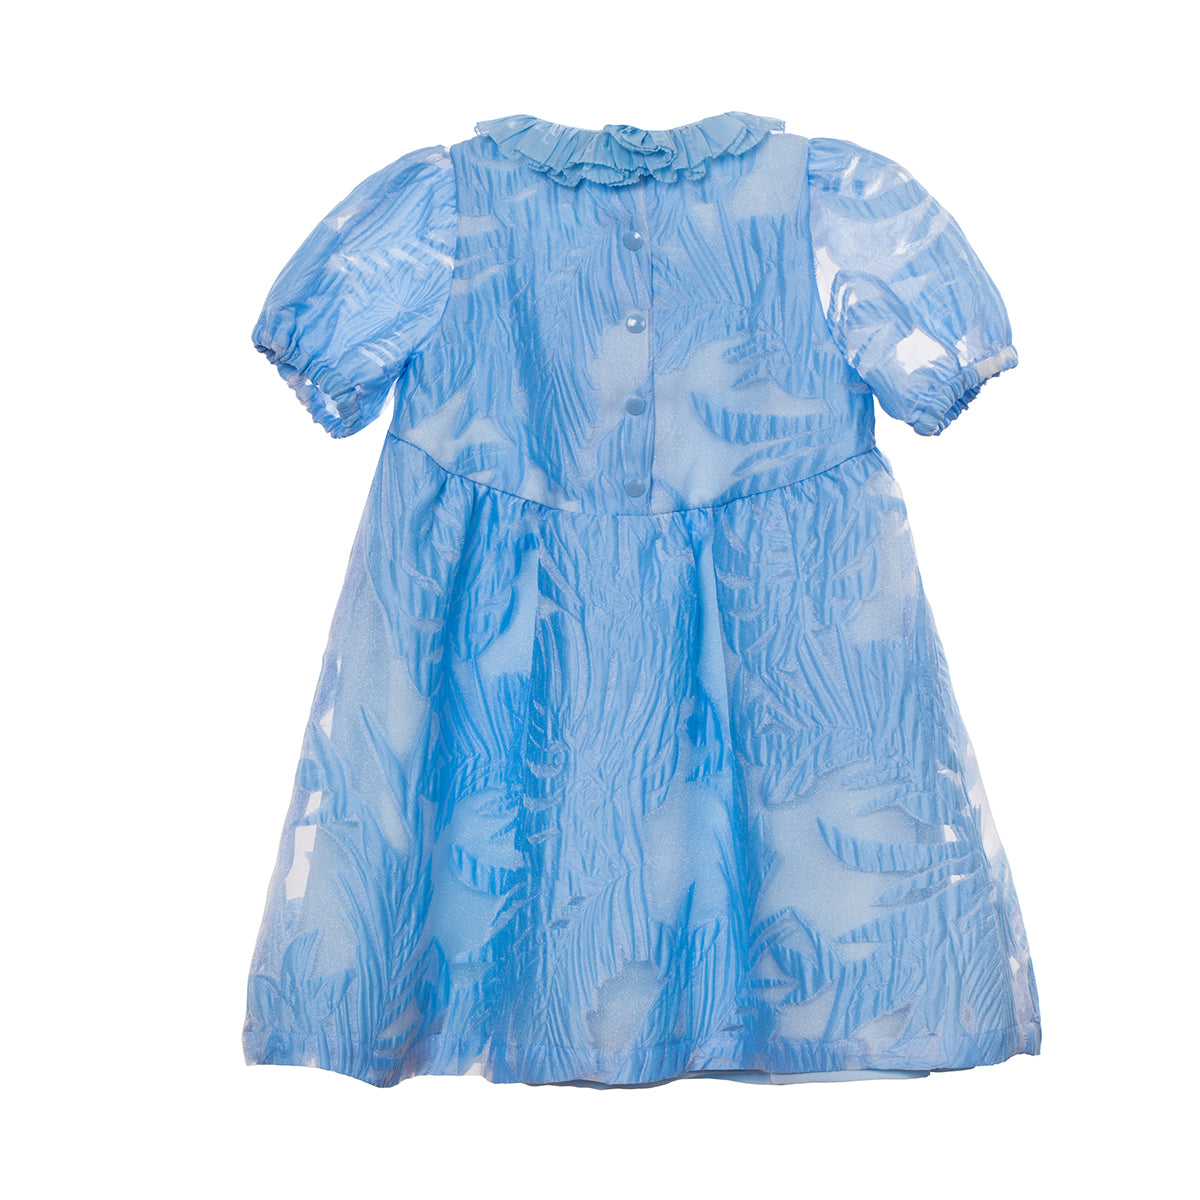 Blue floral organza dress with bow